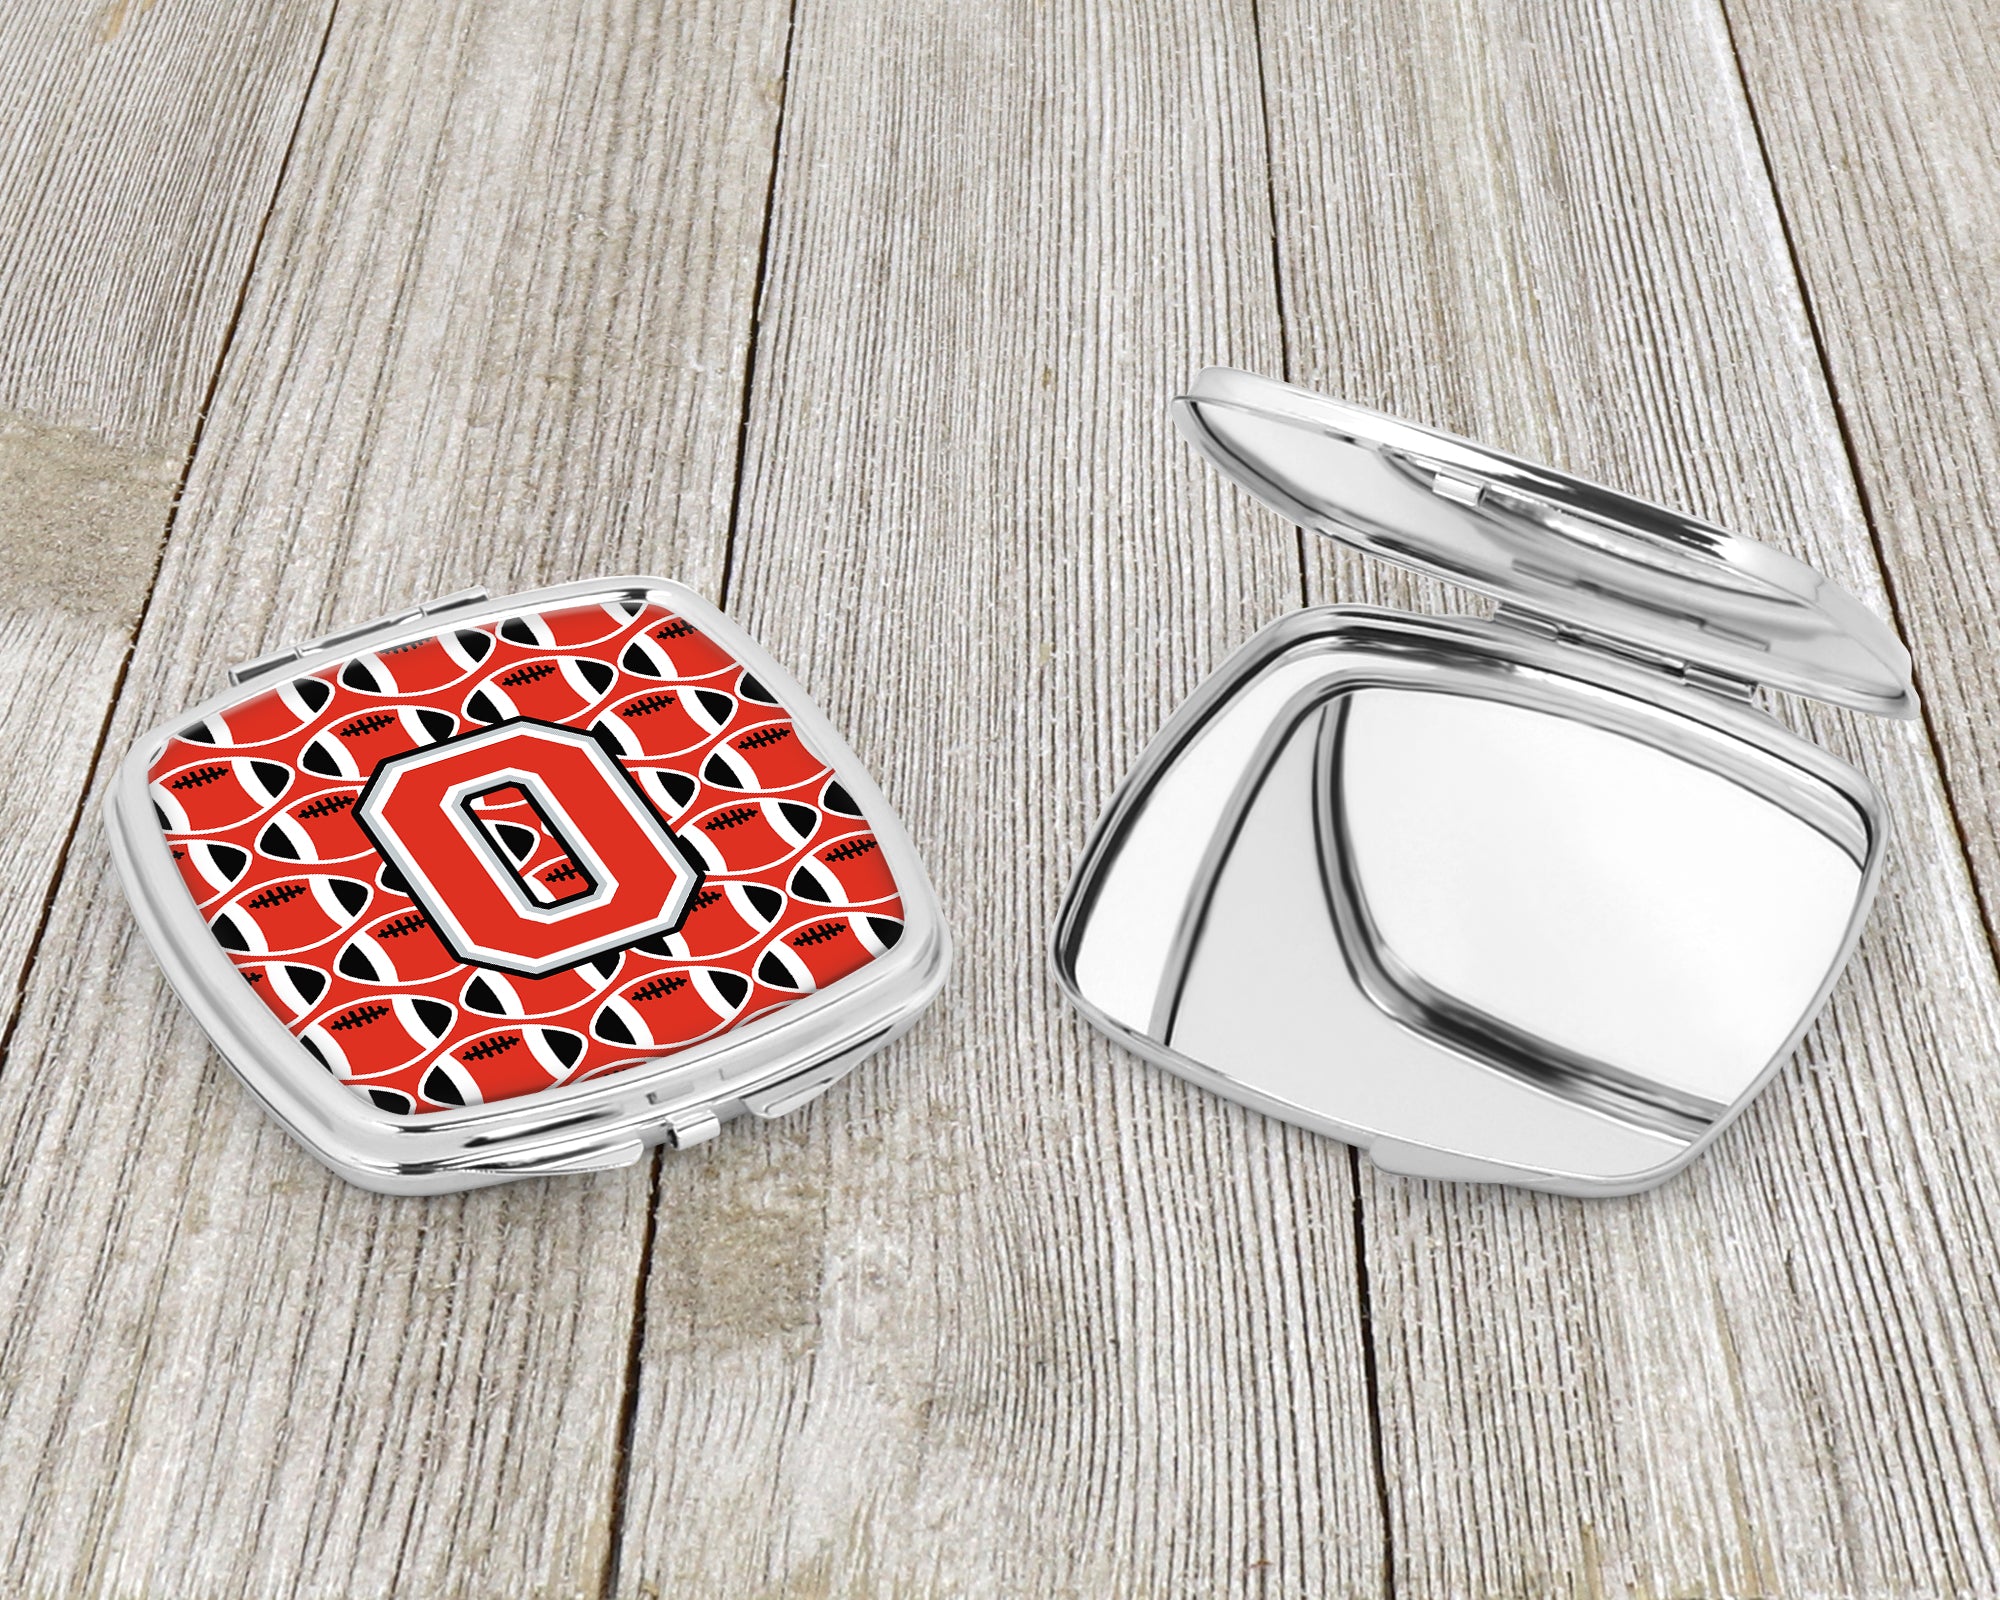 Letter O Football Scarlet and Grey Compact Mirror CJ1067-OSCM  the-store.com.